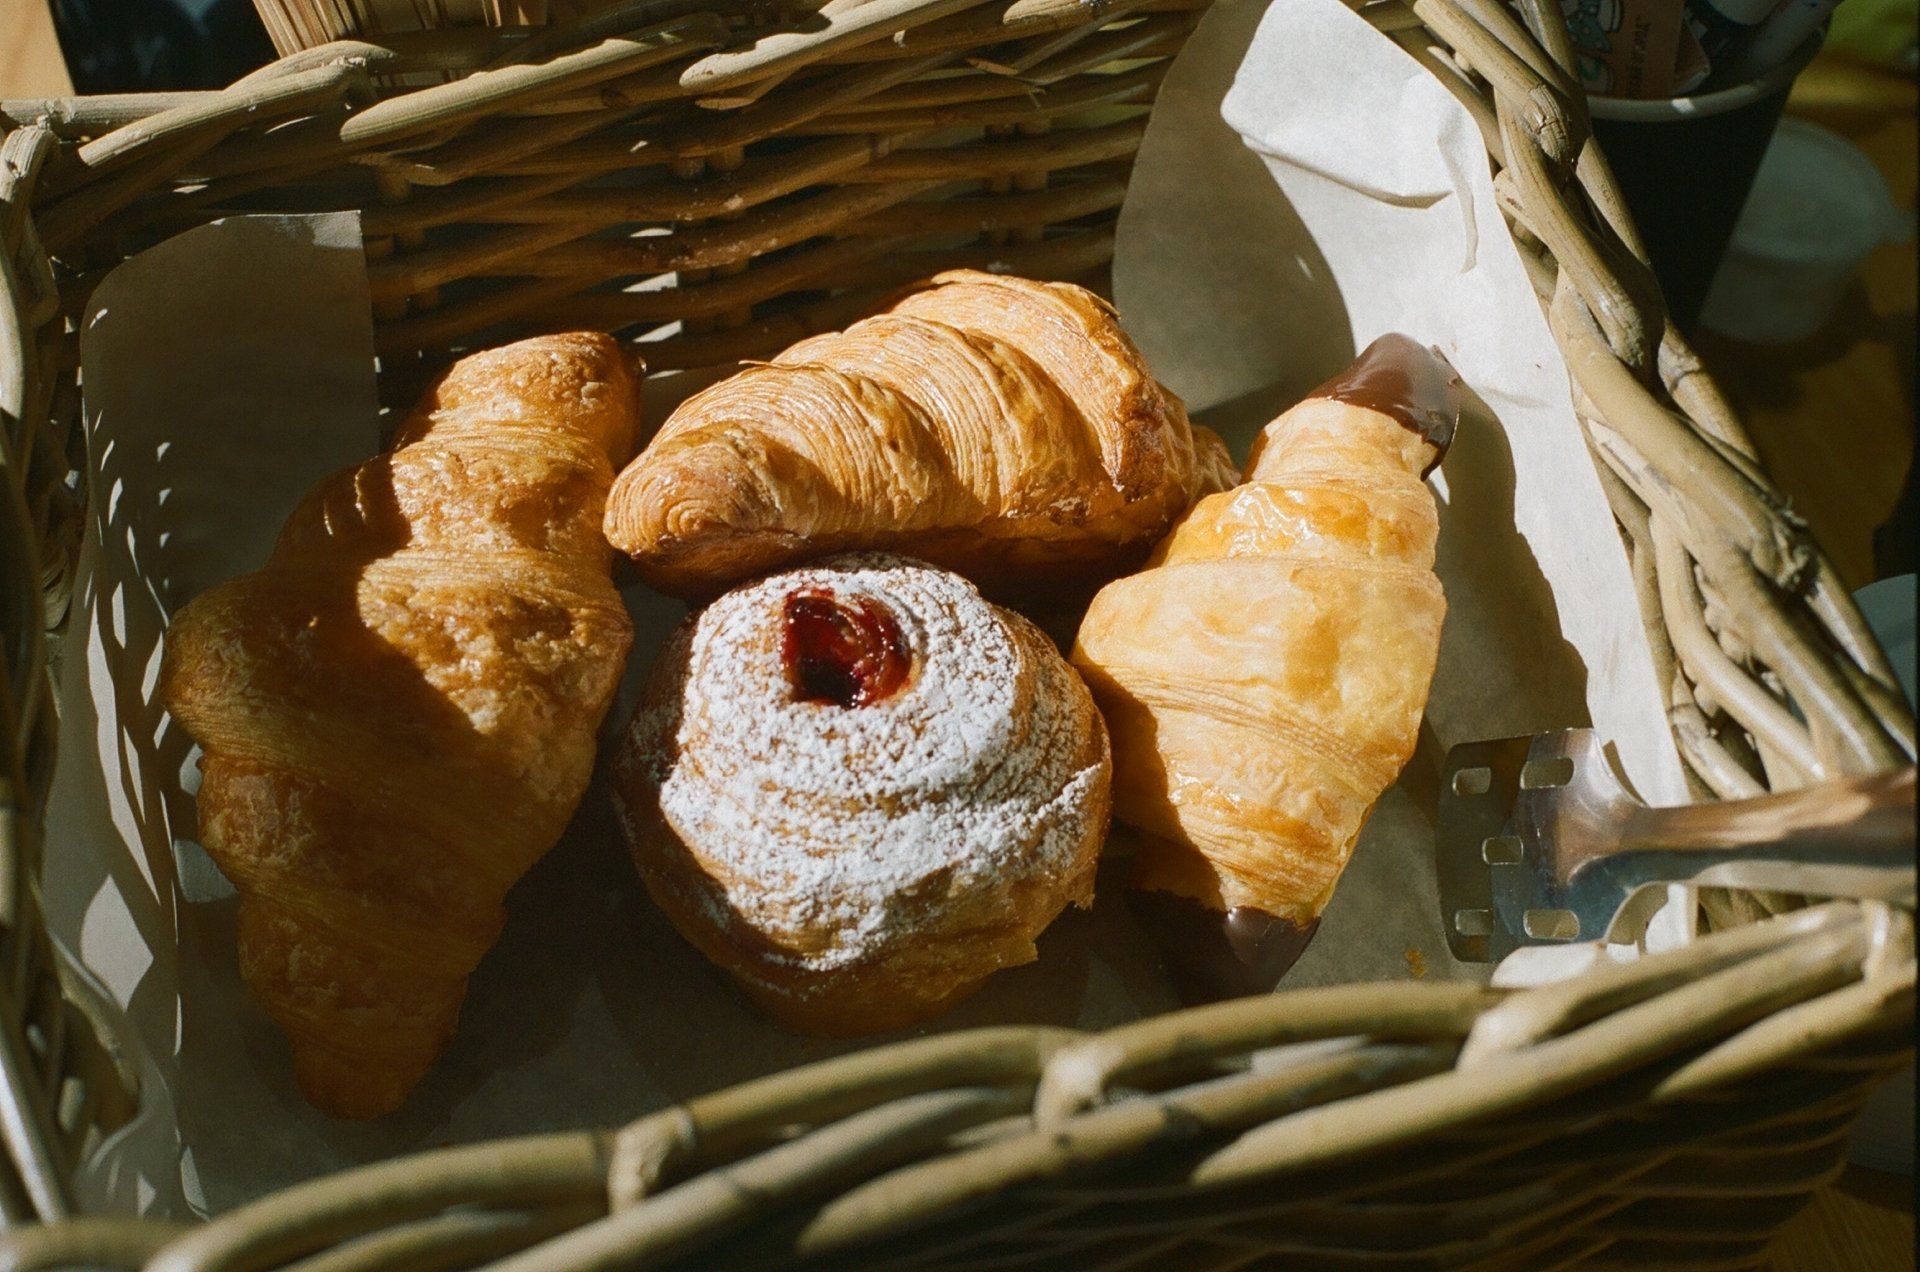 A basket filled with croissants and a donut on a table.